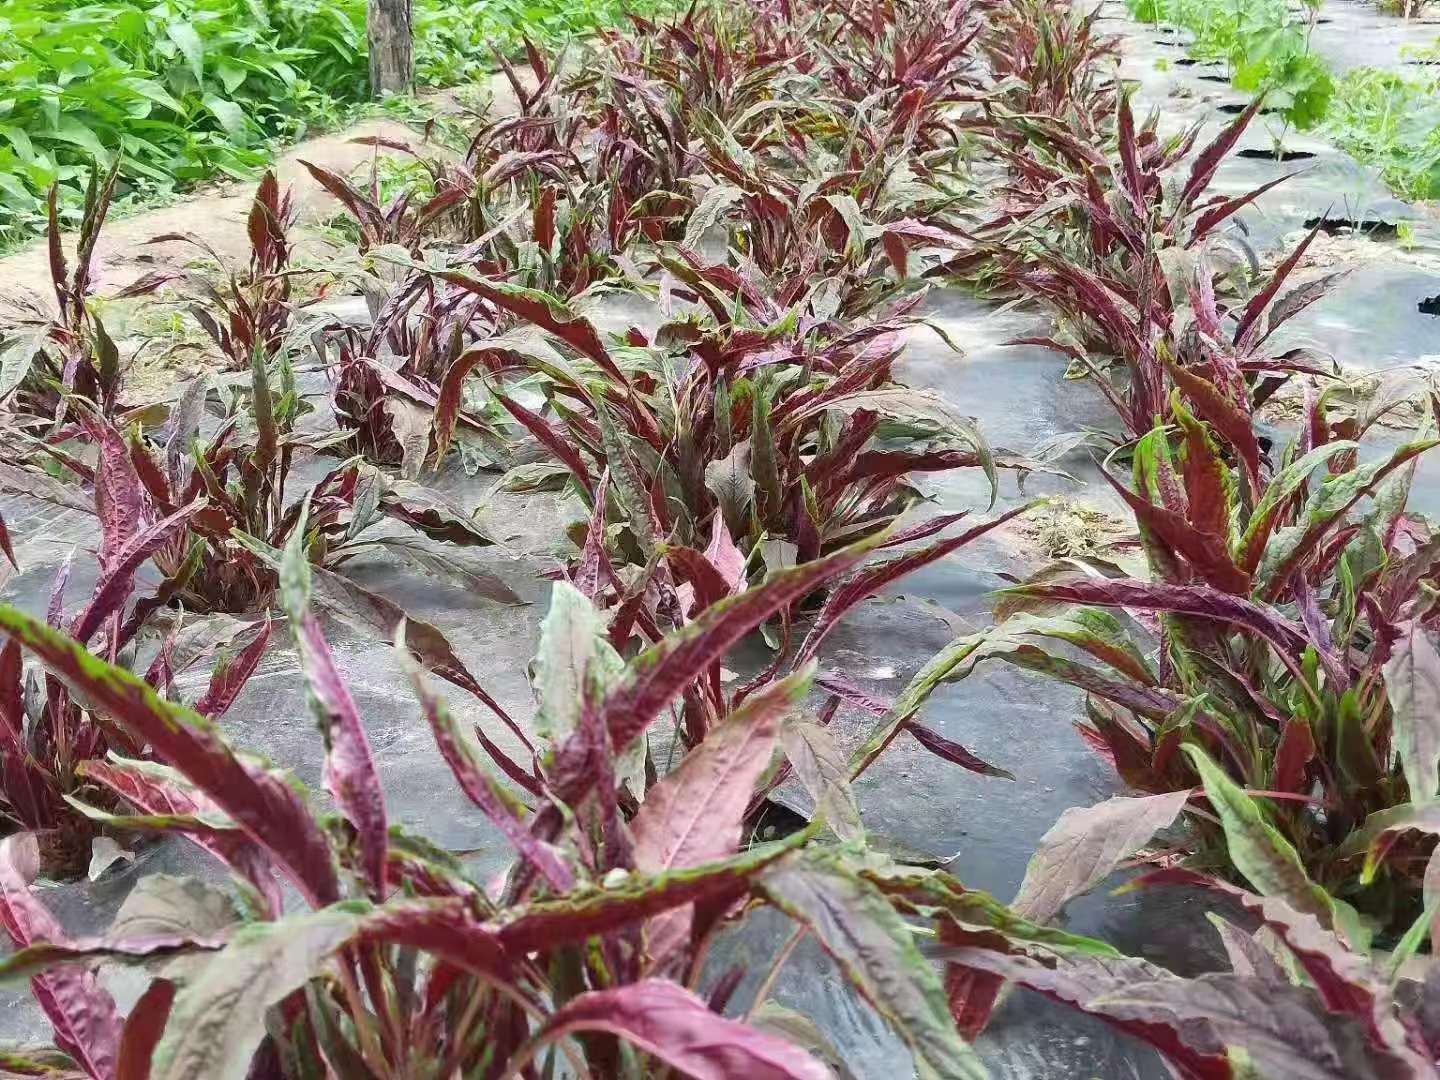 High Quality Amaranthus Seeds For Growing-Red Amaranthus No.2